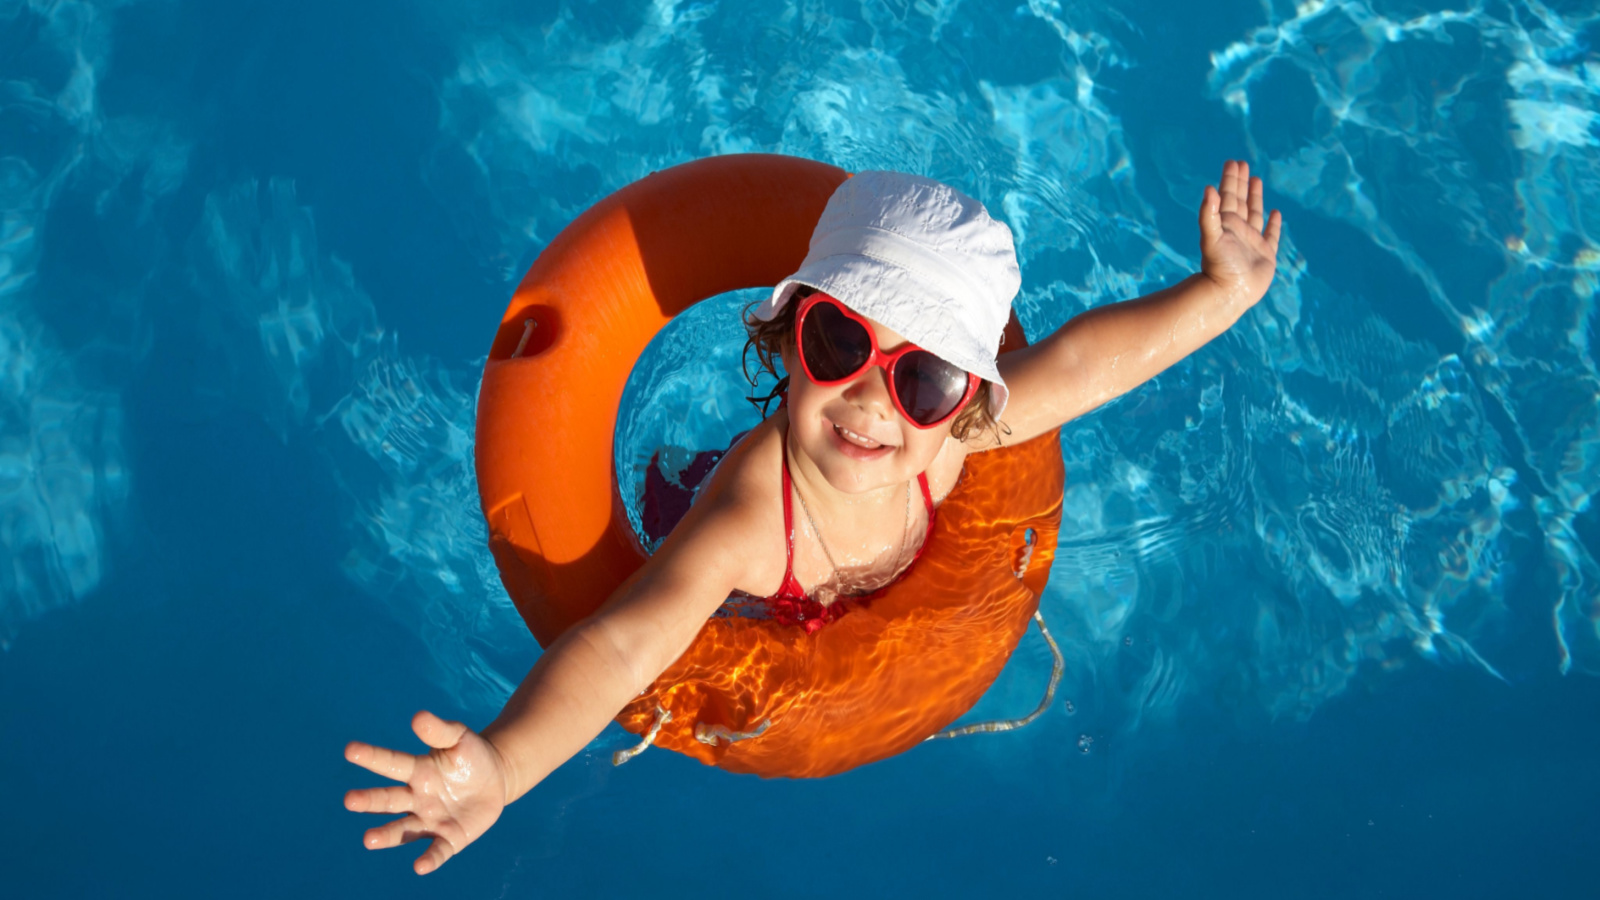 Swimming Pool Safety | Personal Injury Lawyers in Missouri and Illinois